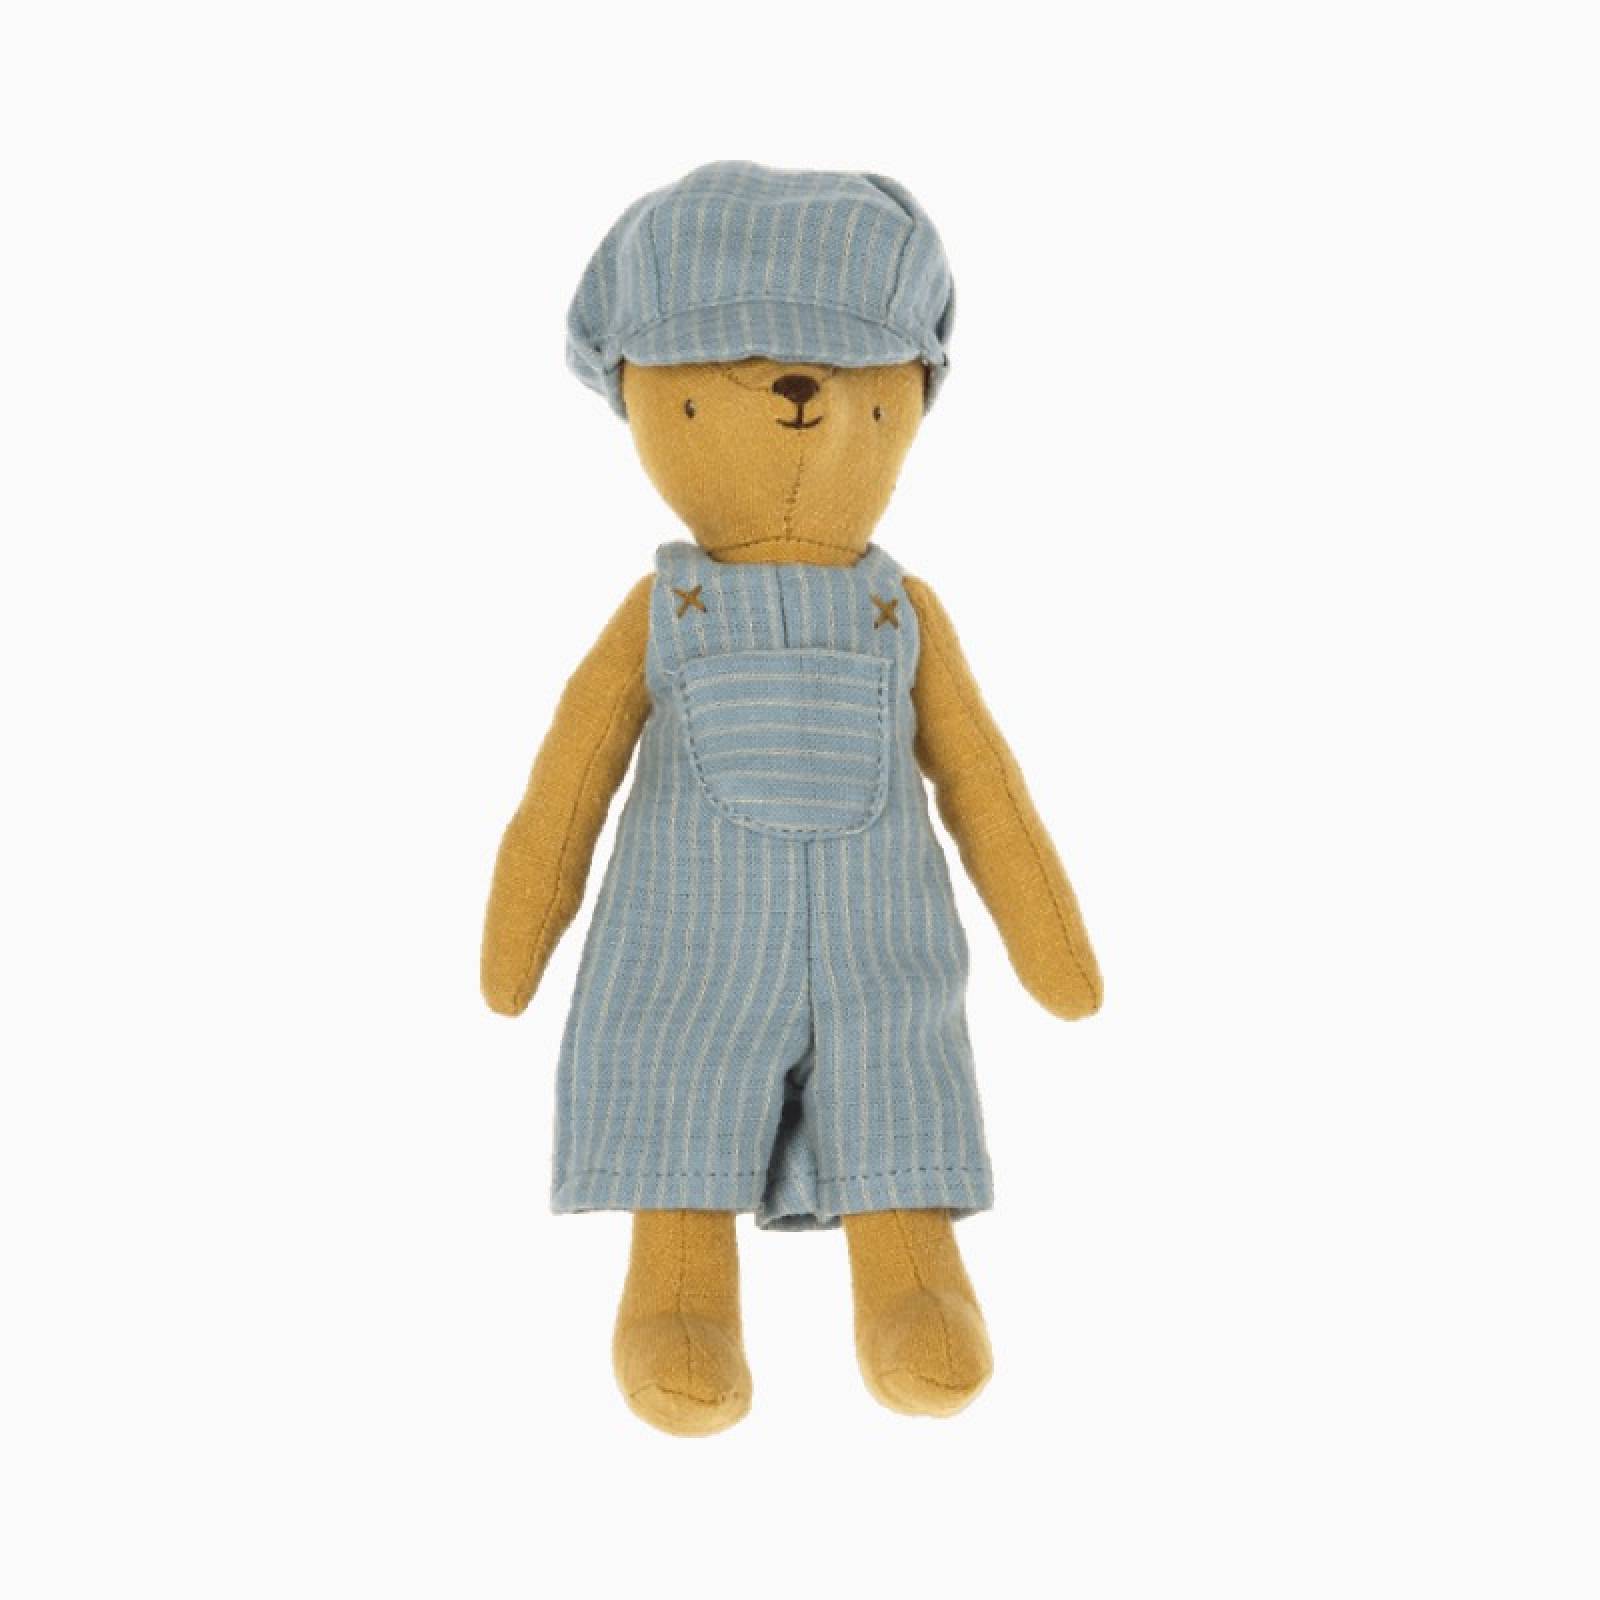 Overalls & Cap Clothes Set For Teddy Junior Soft Toy By Maileg thumbnails